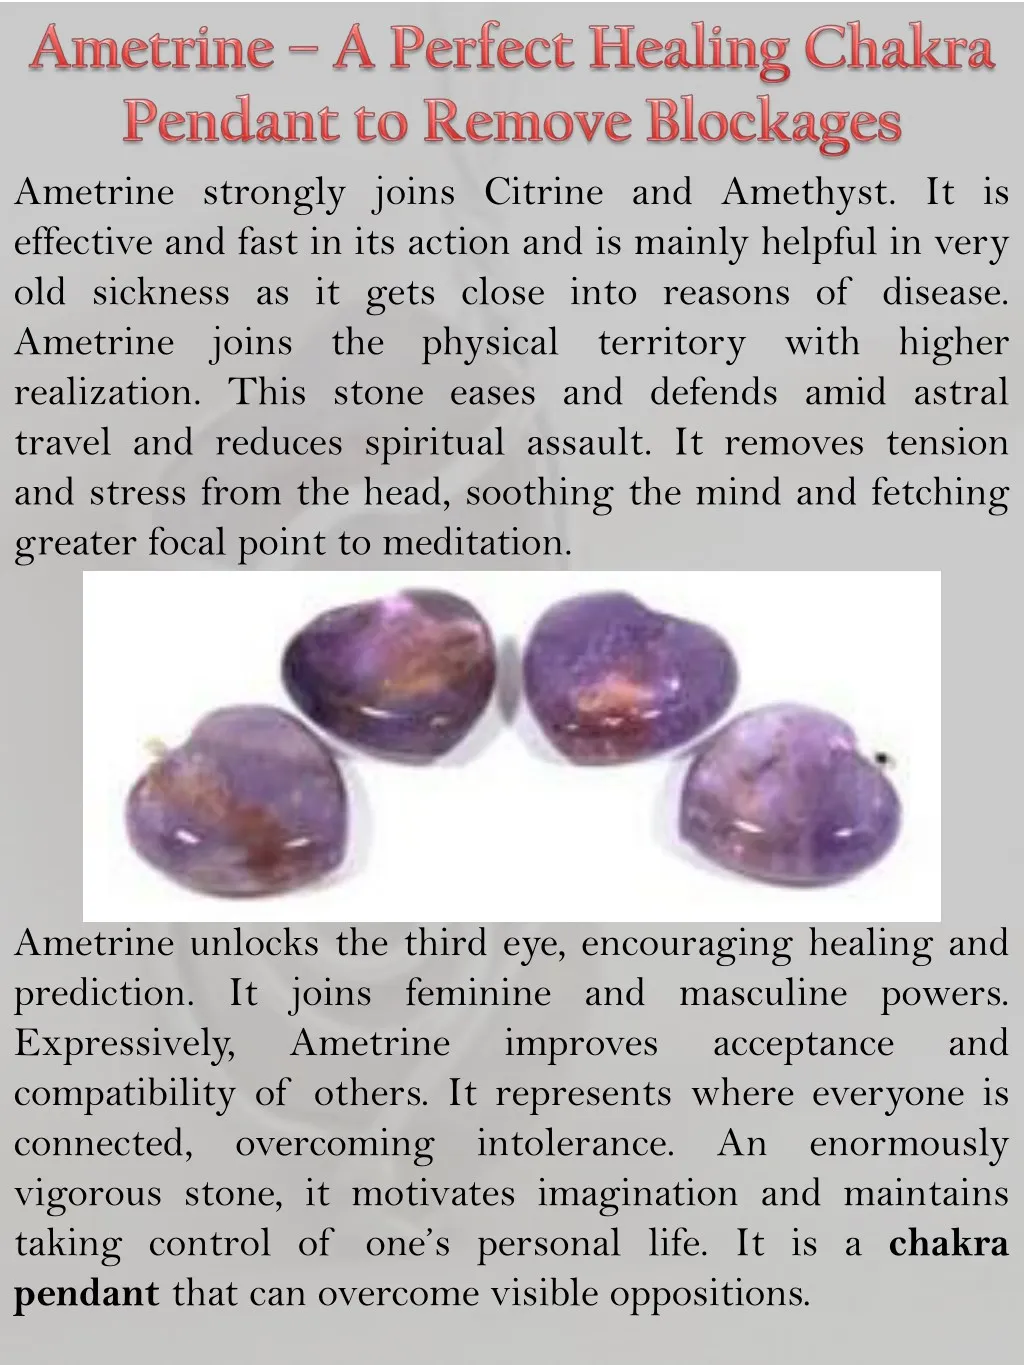 ametrine strongly joins citrine and amethyst